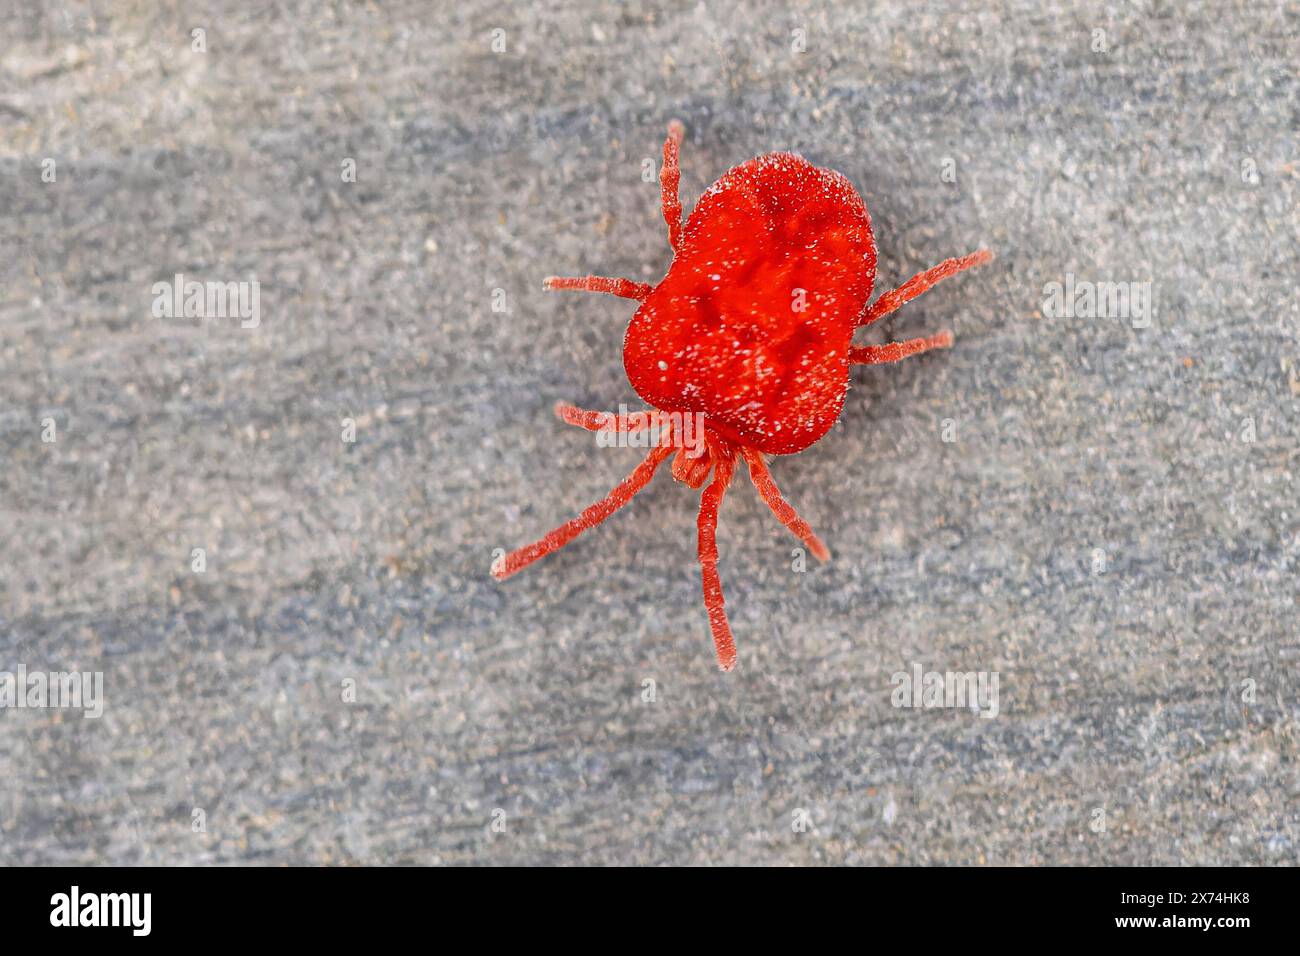 Red mite (Trombidium holosericeum) is a species of mite in the genus Trombidium. It occurs in Europe, Asia, and Africa and is commonly confused with o Stock Photo